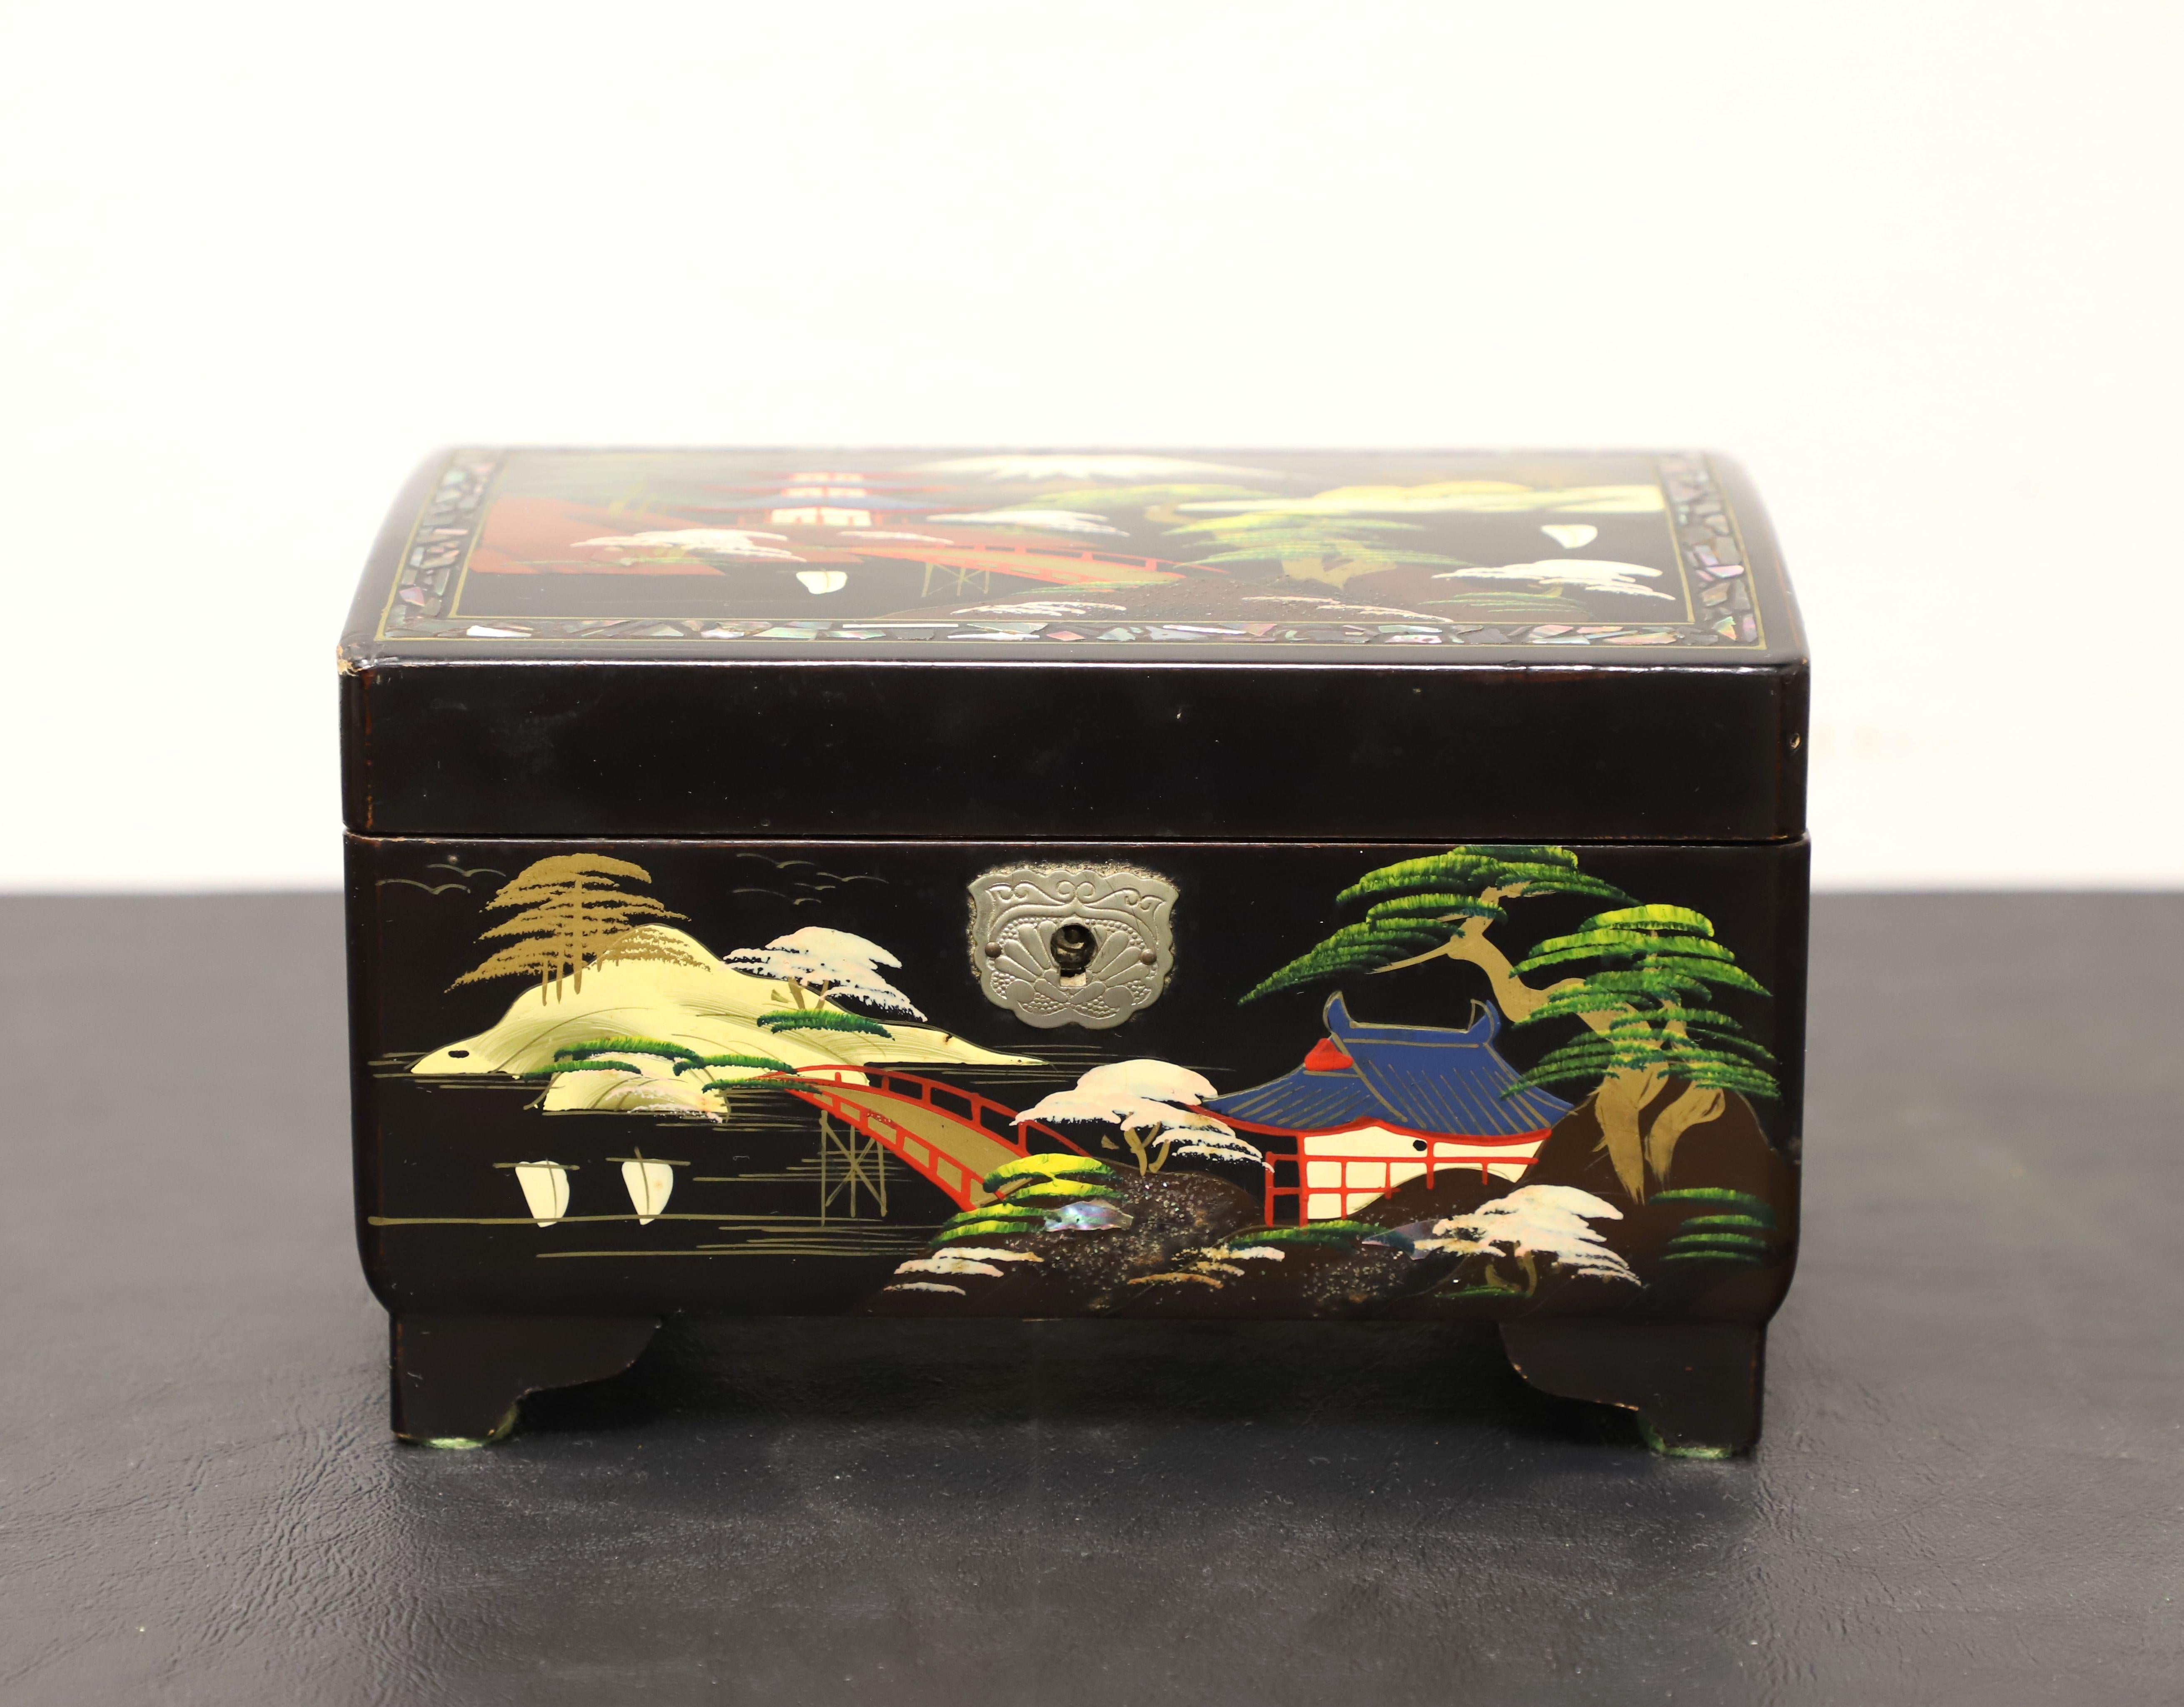 A decorative Japanese style jewelry box, unbranded. Wood with black lacquer, hand painted Japanese scenes, metal hardware, and is footed. Features interior side of lid with hand painted mirror, a felt lined lower interior, a hinged lift-up upper